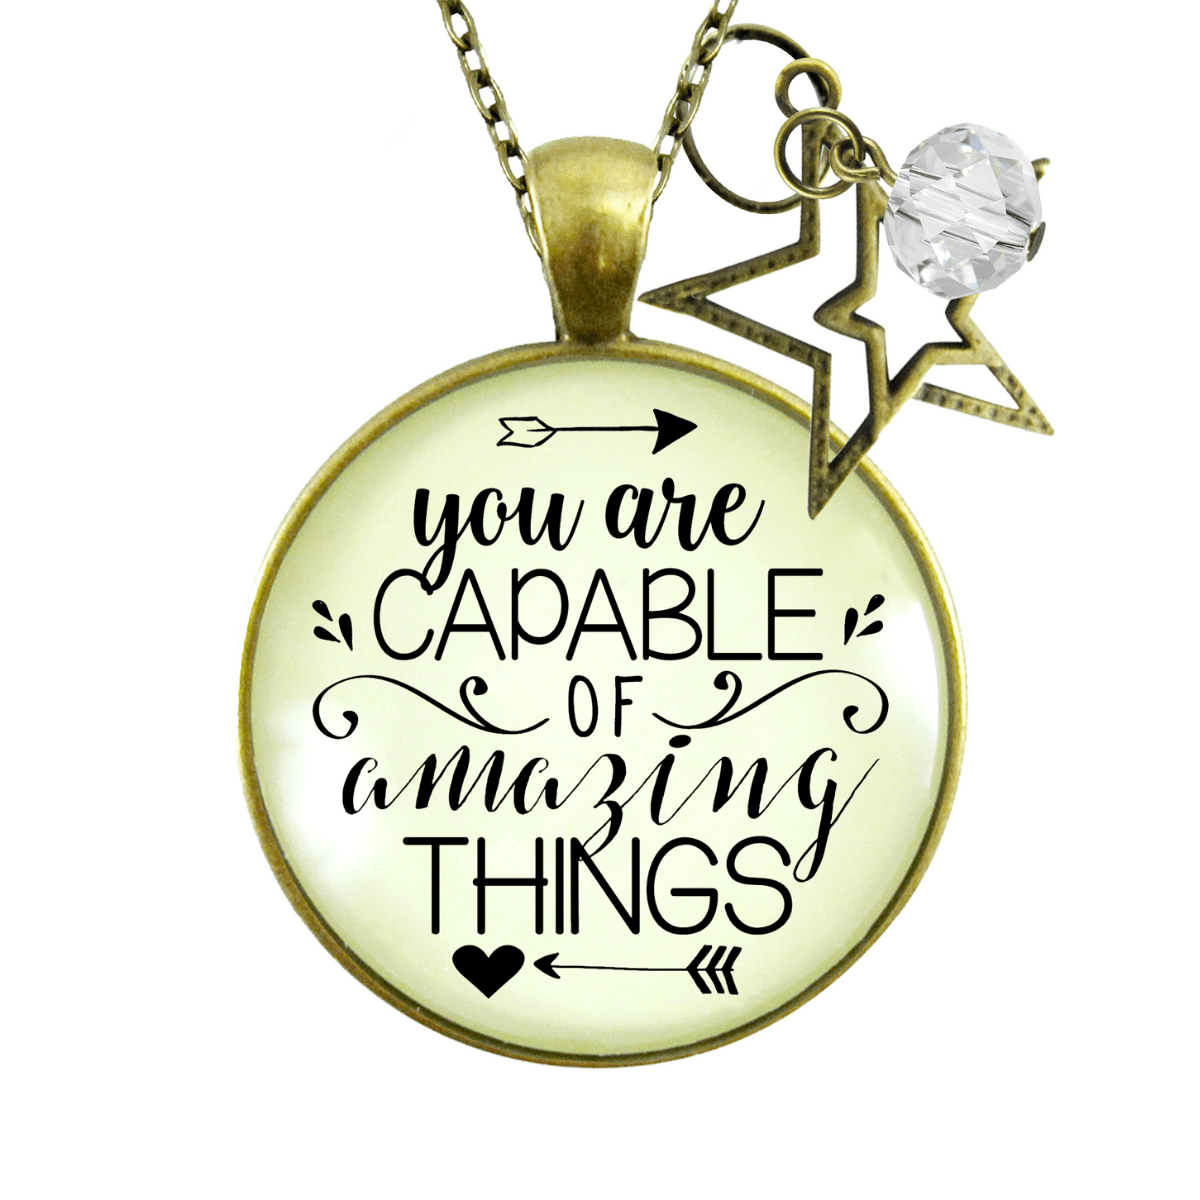 Gutsy Goodness You are Capable of Amazing Things Necklace Positive Quote Women Charm Jewelry - Gutsy Goodness Handmade Jewelry;You Are Capable Of Amazing Things Necklace Positive Quote Women Charm Jewelry - Gutsy Goodness Handmade Jewelry Gifts